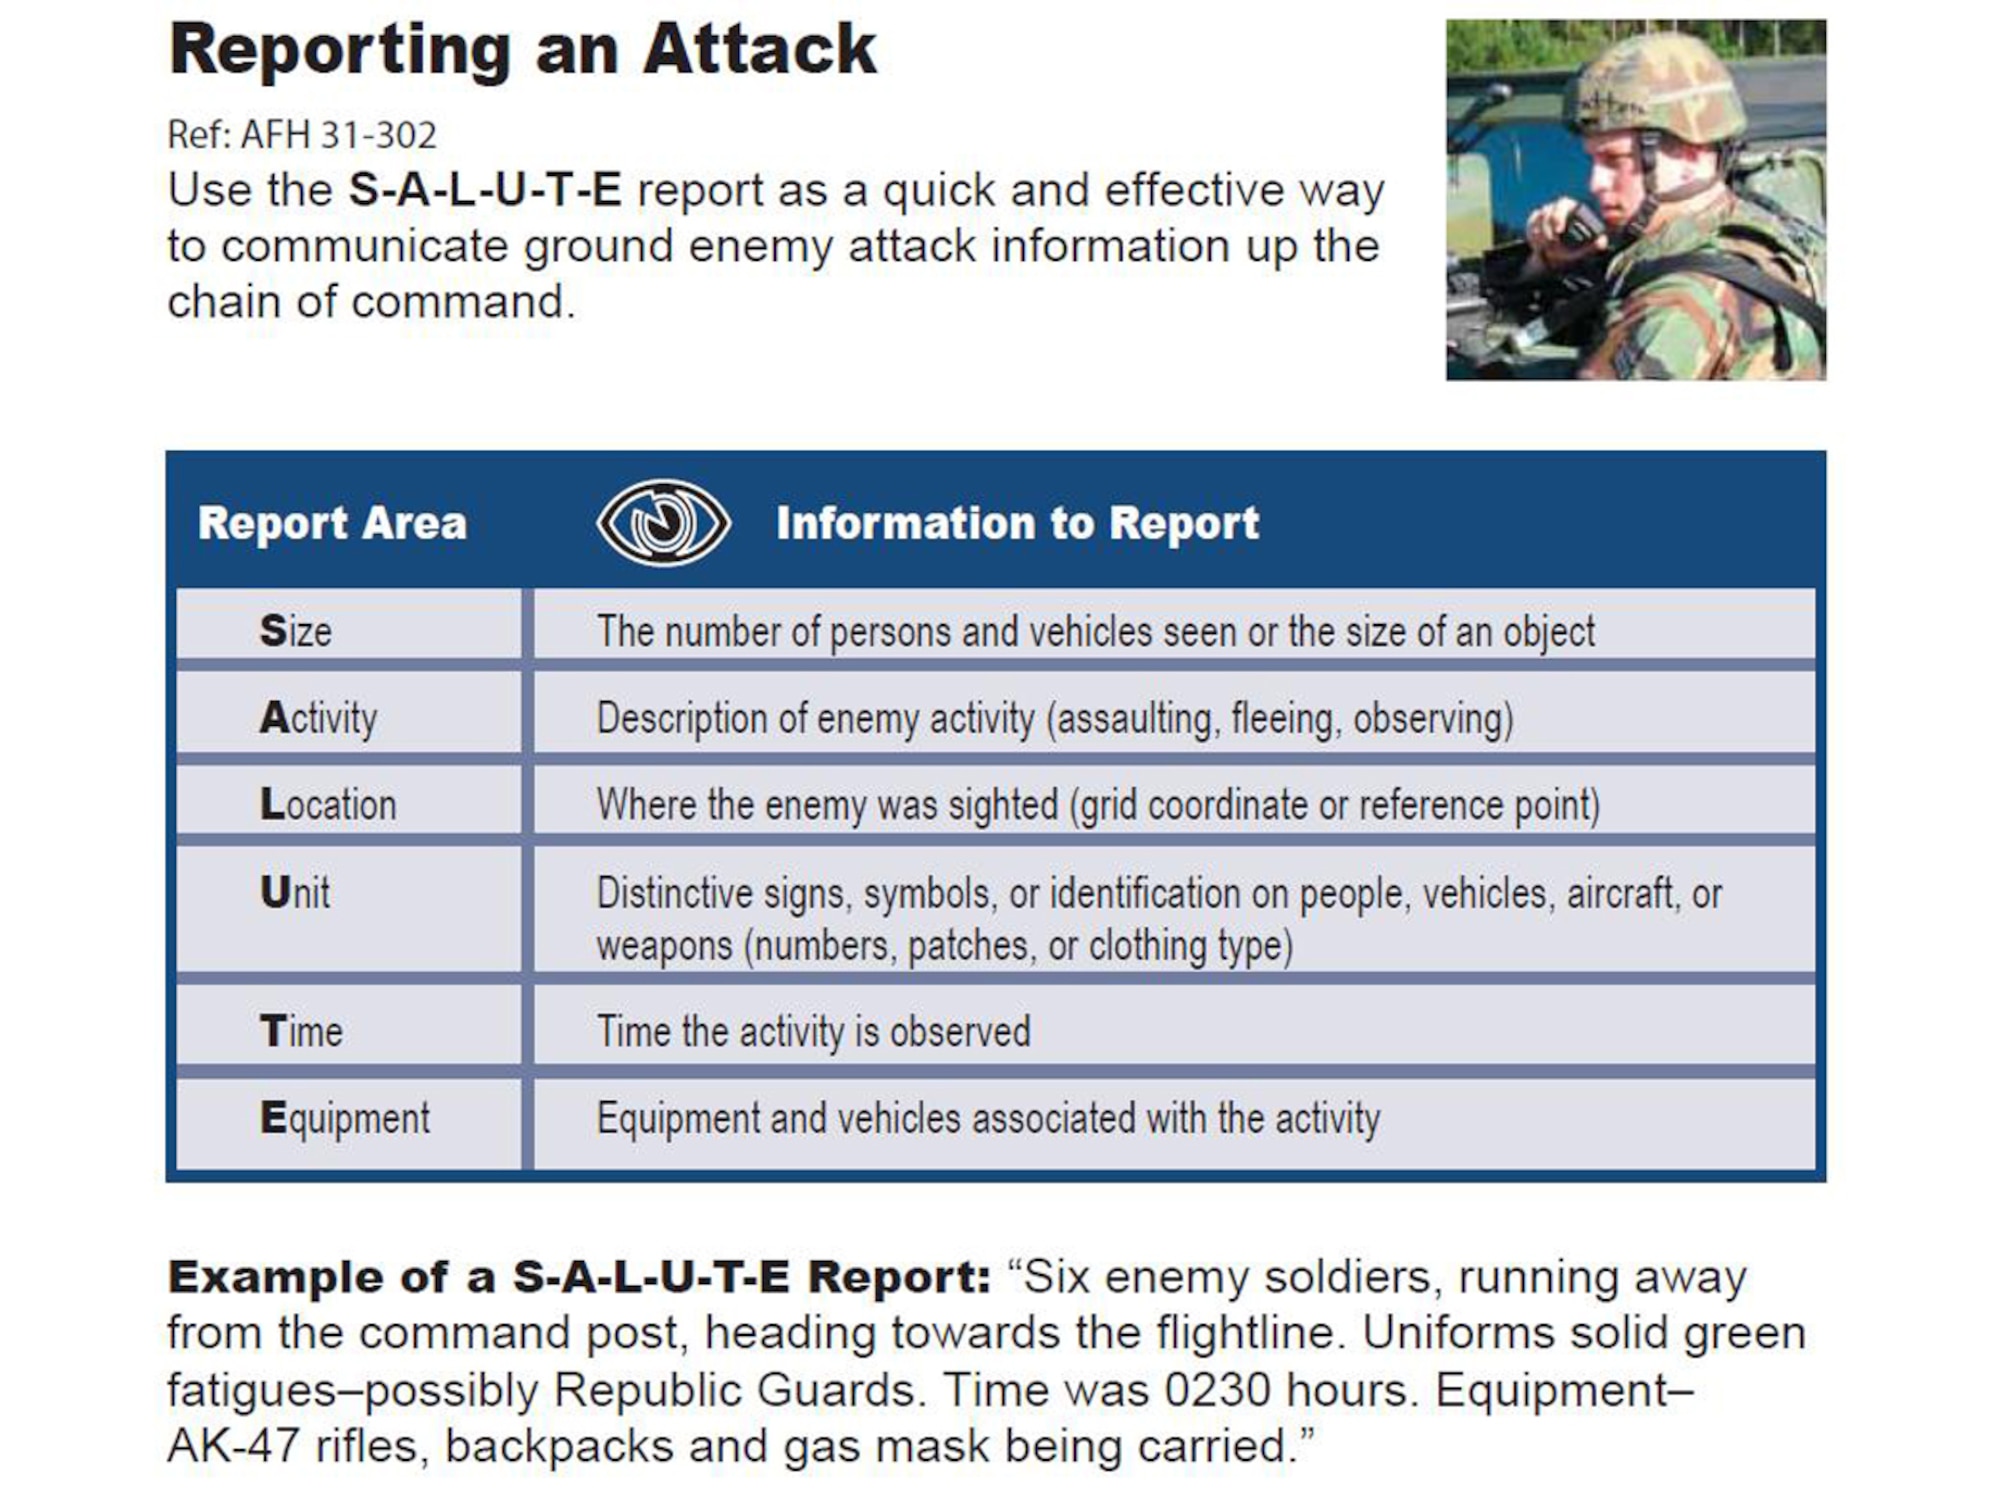 When reporting attacks, use S-A-L-U-T-E  as a quick and effective way to communicate up the chain of command. SALUTE stands for: SIZE-ACTIVITY-LOCATION-UNIT-TIME-EQUIPMENT. (U.S. Air Force graphic)
